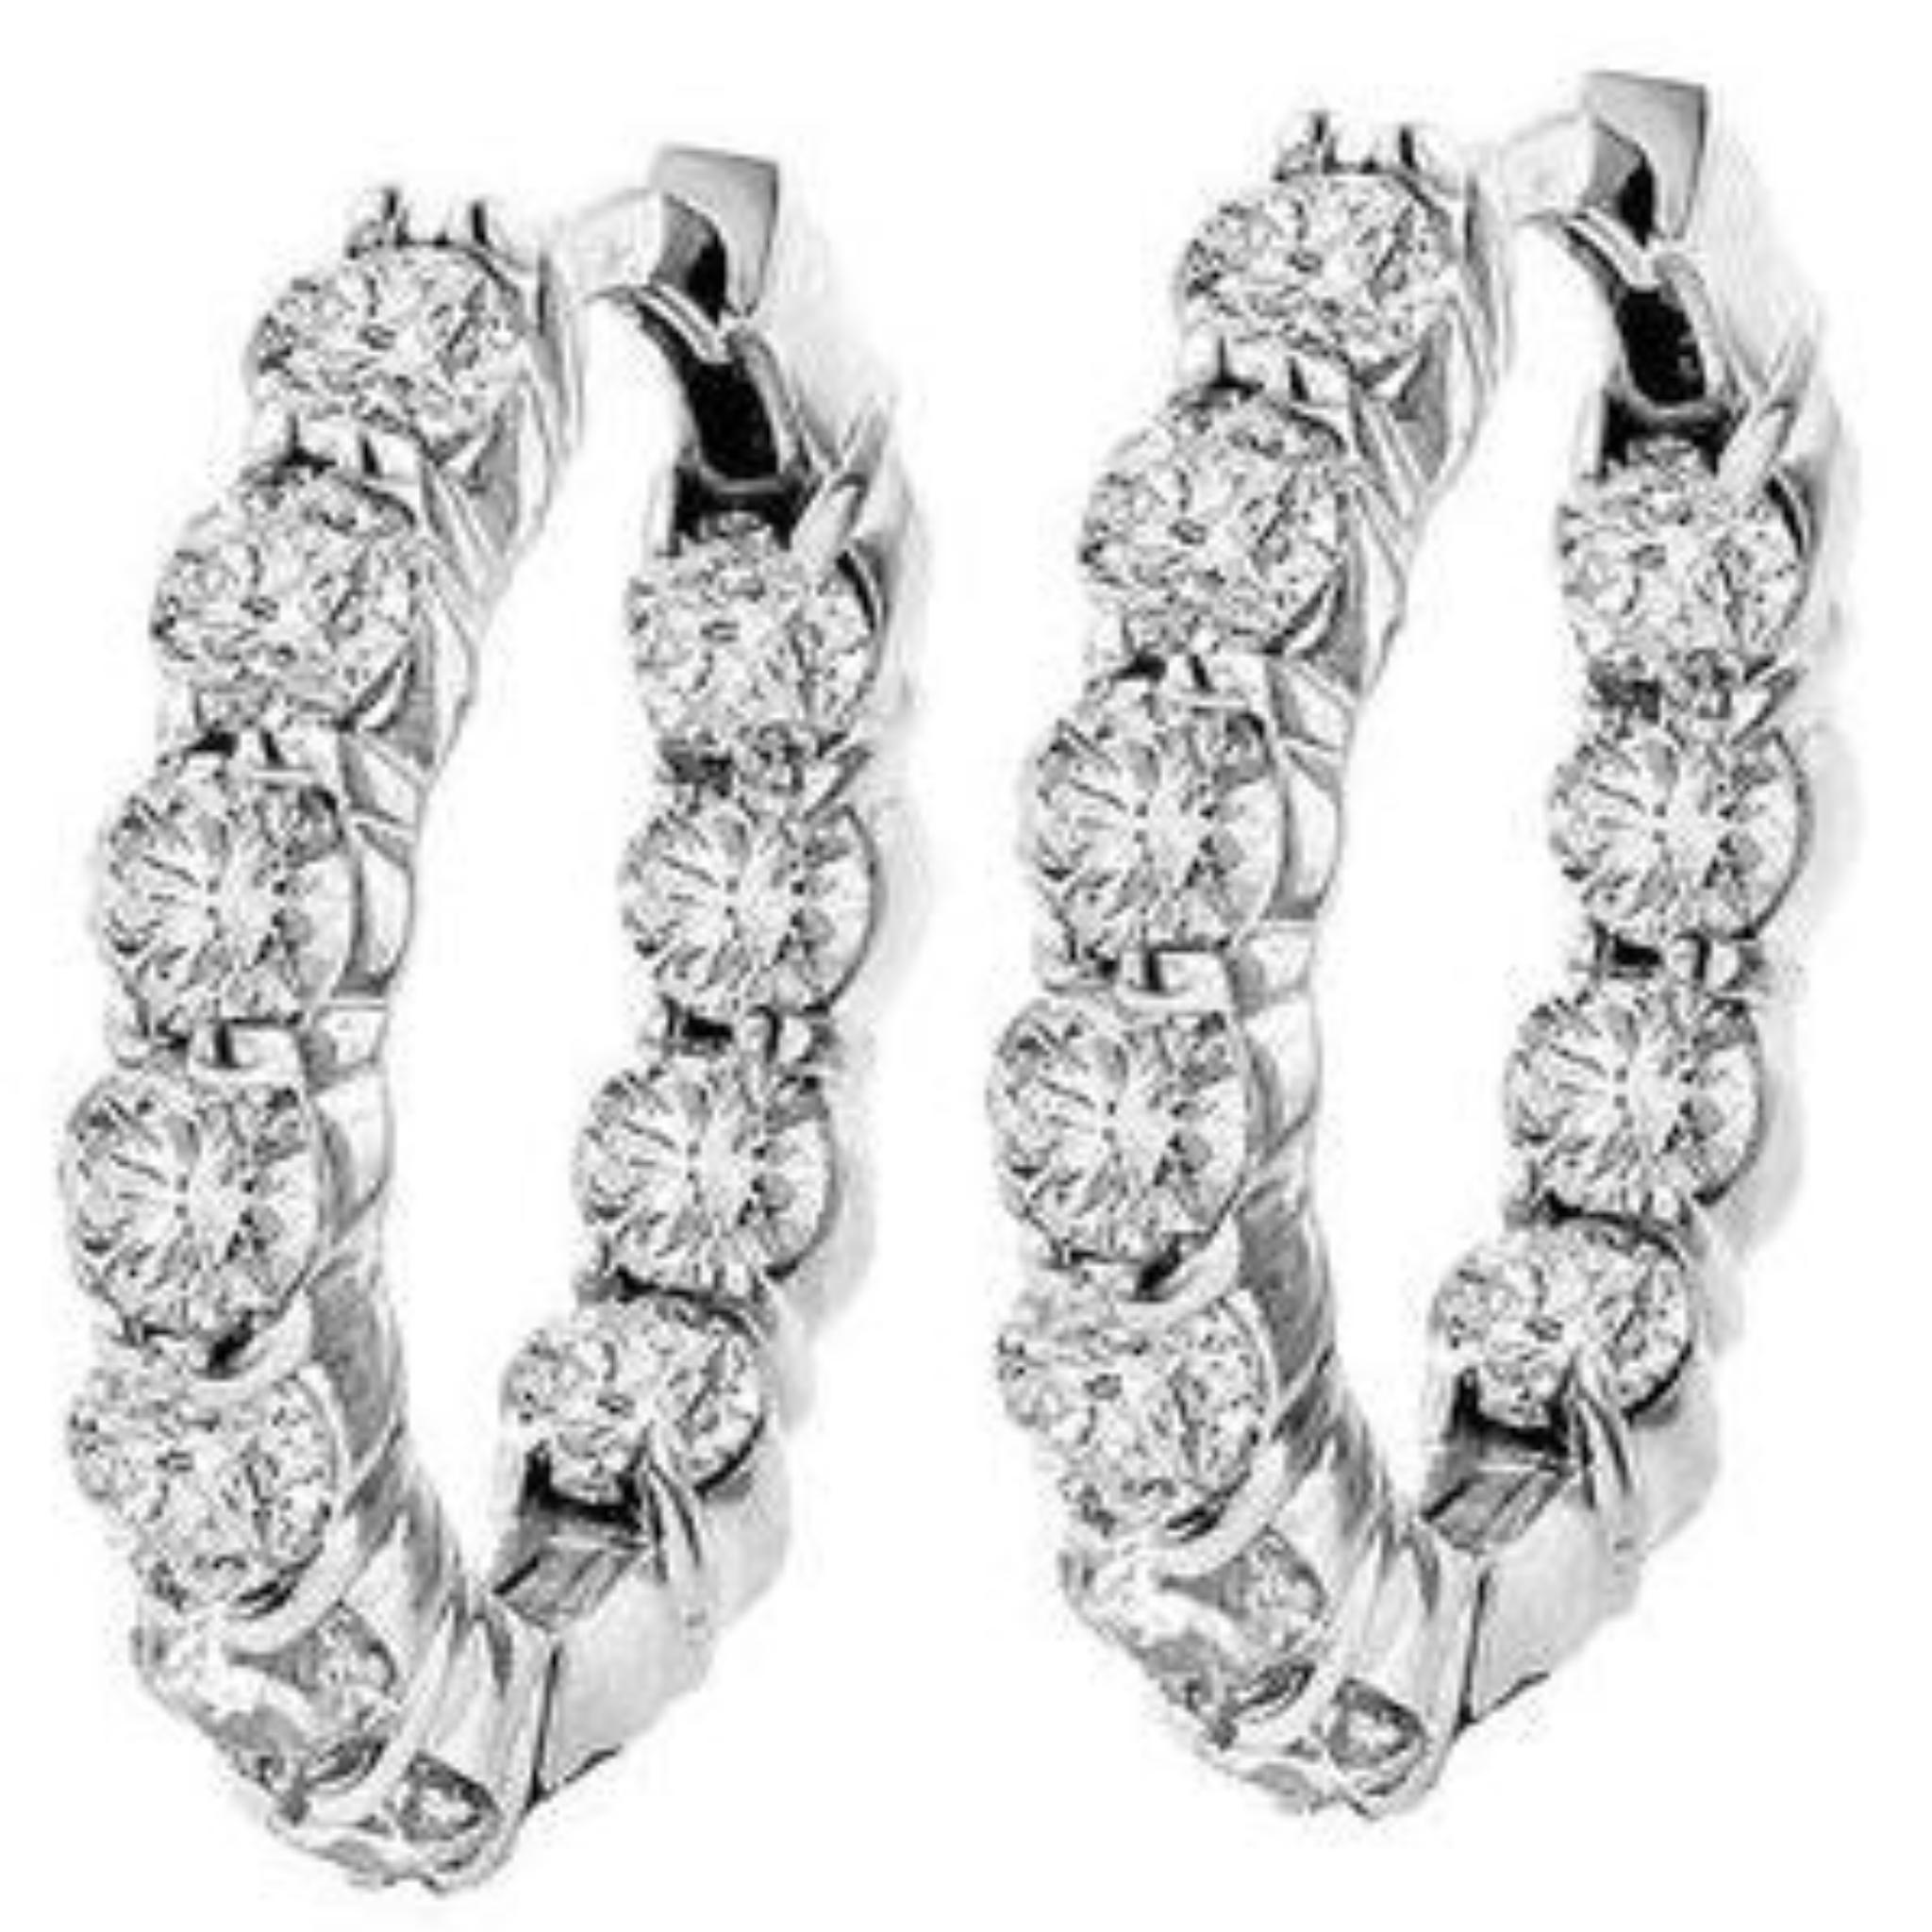 14 Kt White Gold Hoop Earrings with 4.25 cts.jpg